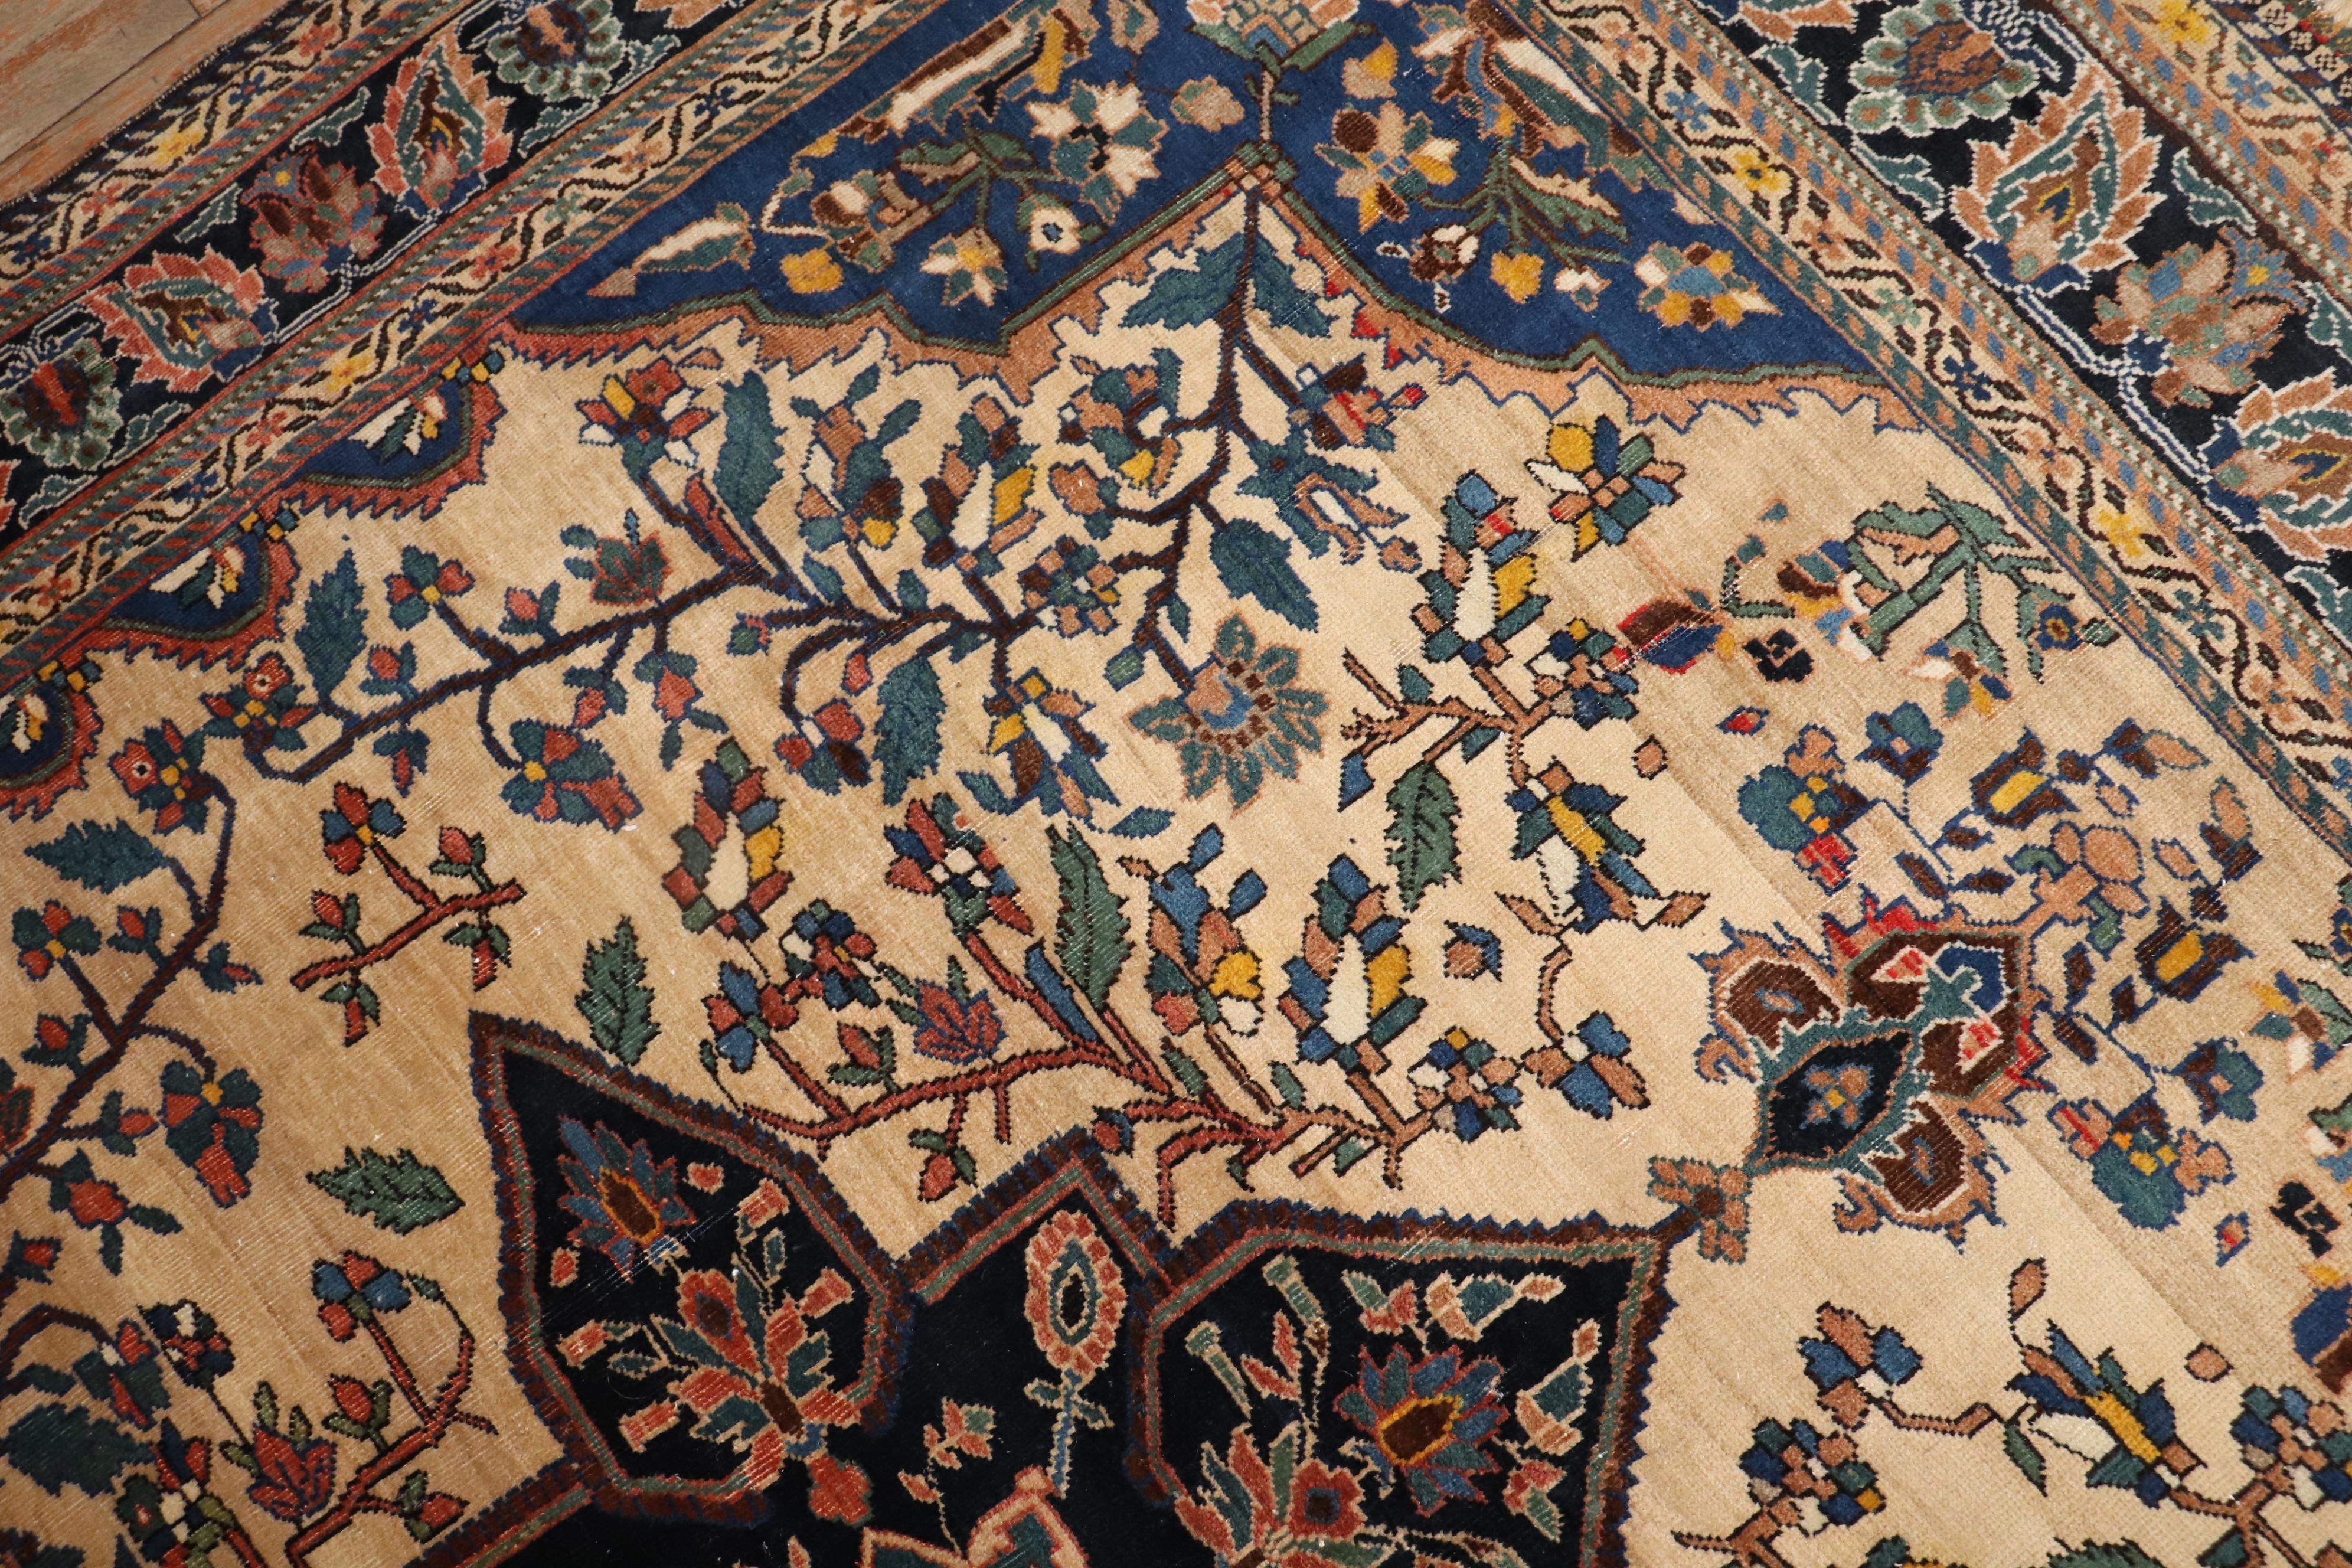 Zabihi Collection Early 20th Century Qashqai Rare Small Room Size Rug In Good Condition For Sale In New York, NY